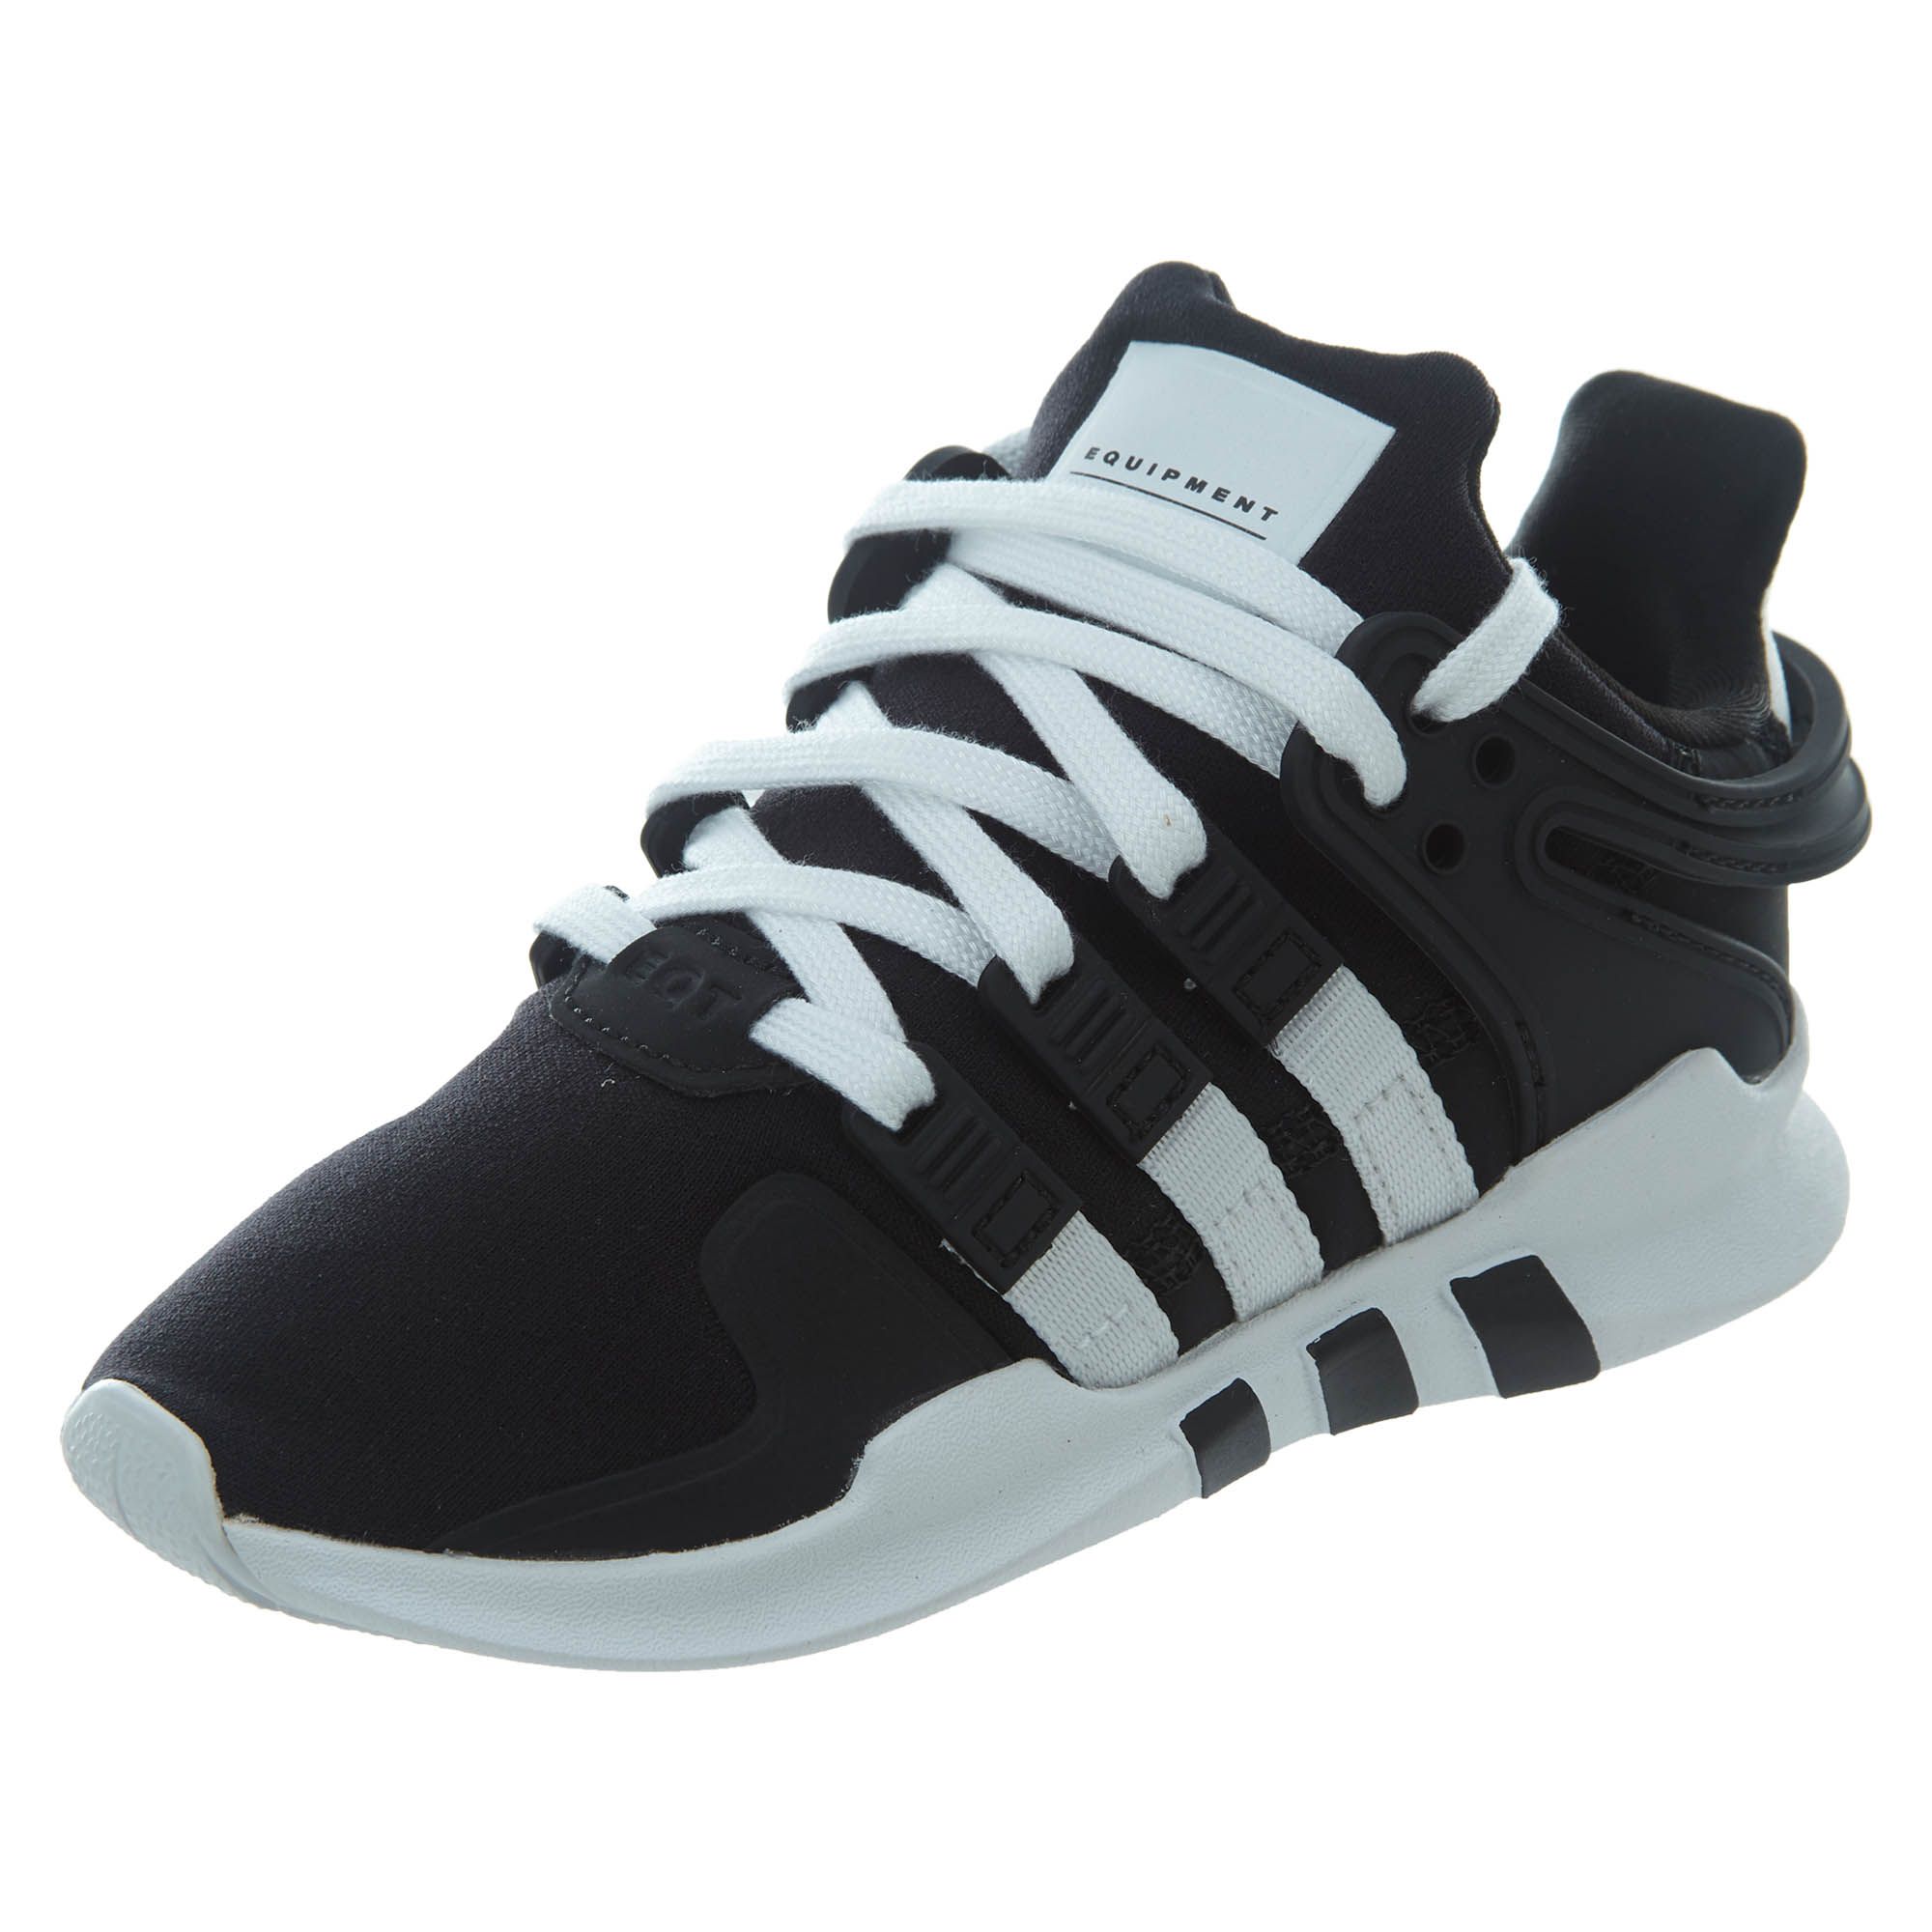 Eqt Support Adv Kids Online Sale, UP TO 